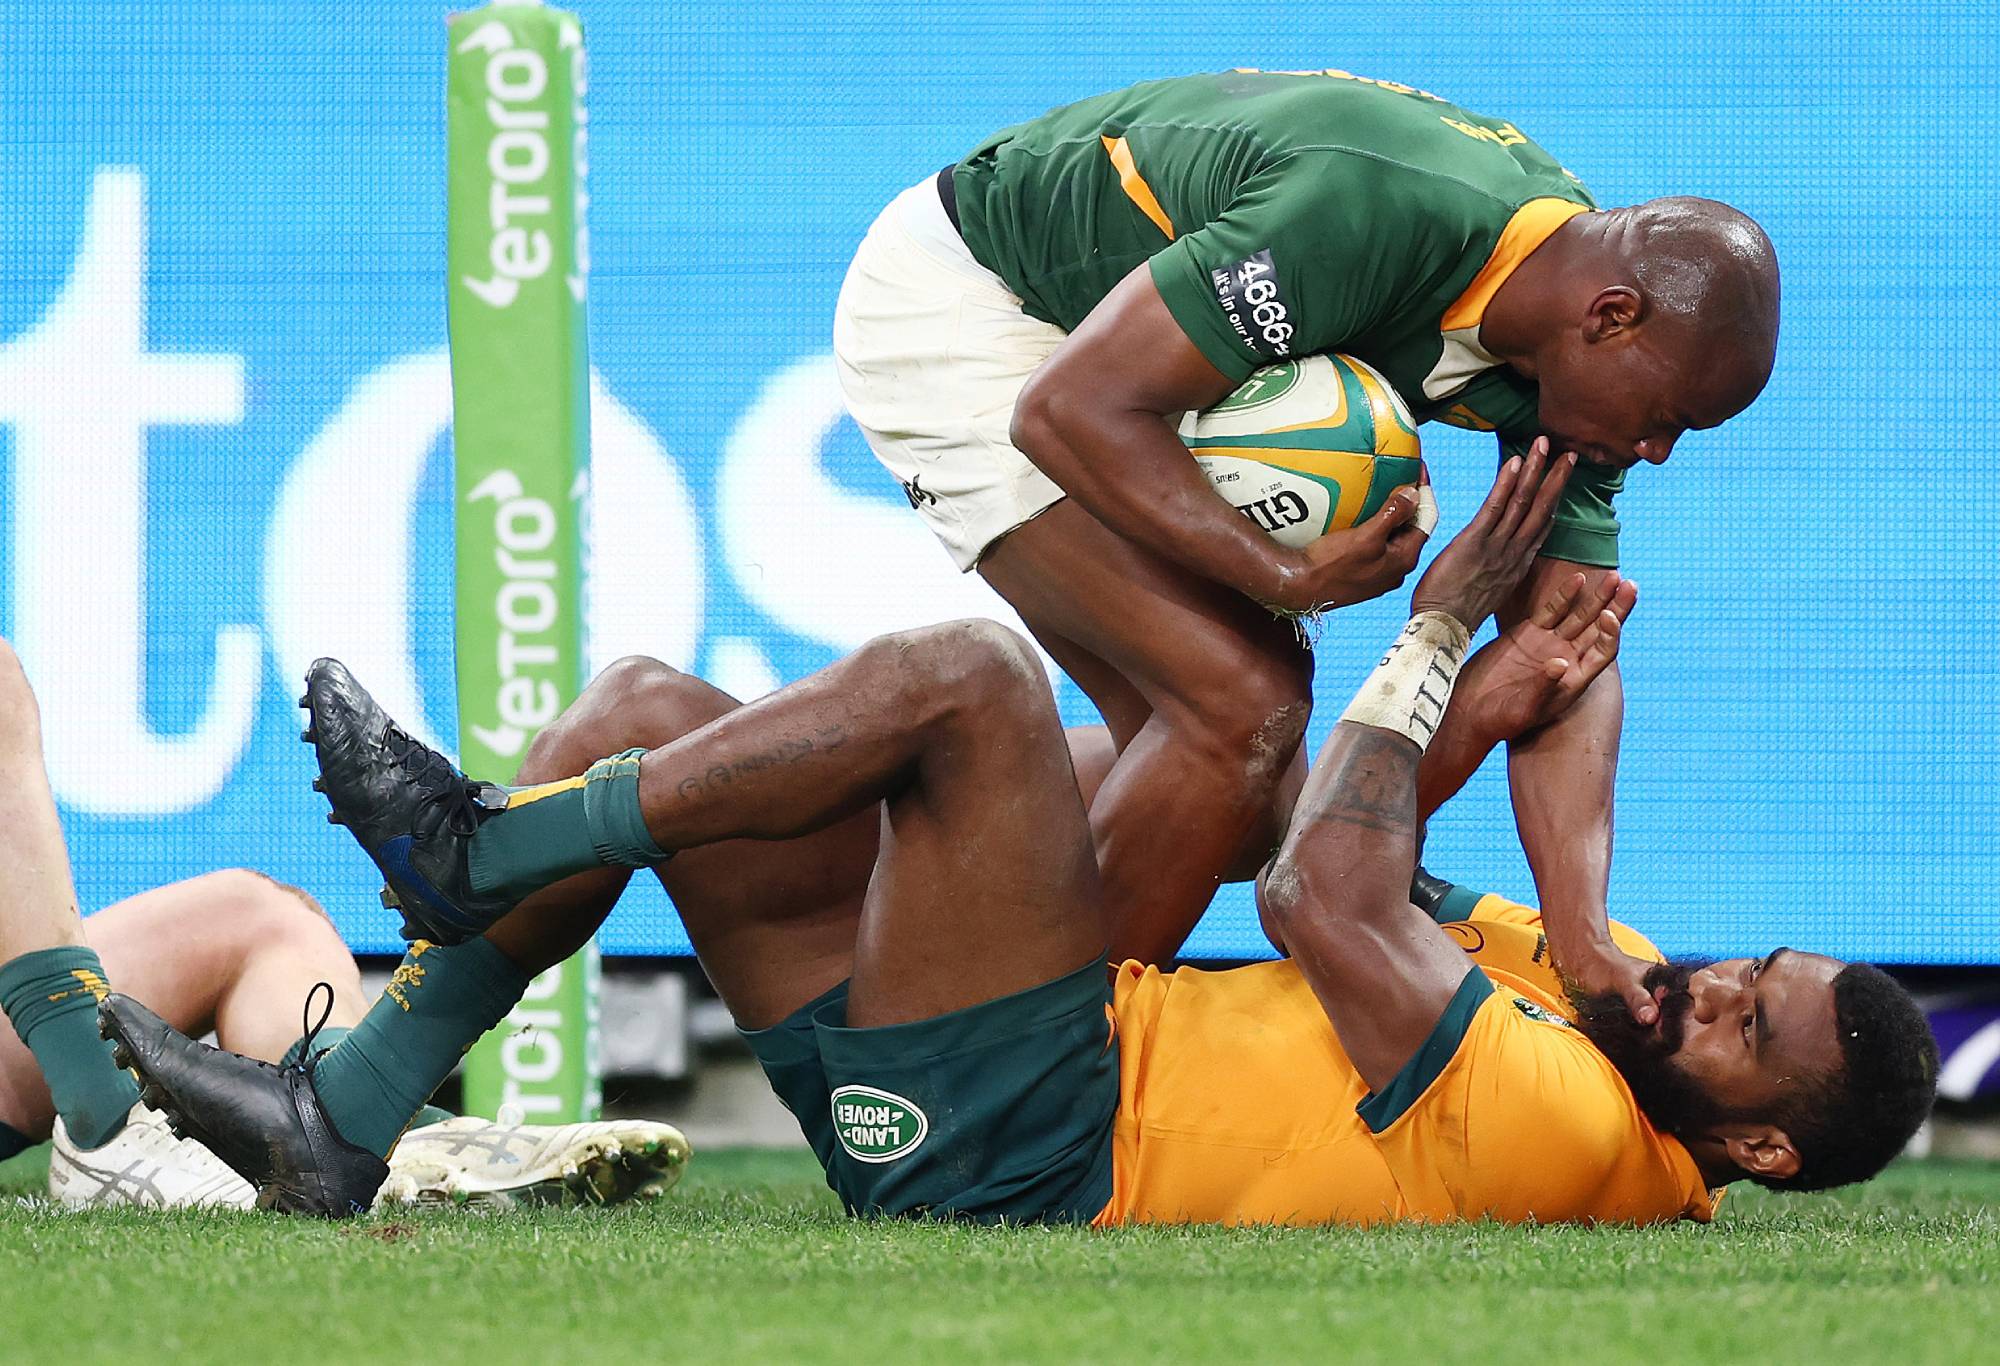 Makazole Mapimpi of the Springboks scuffles with Marika Koroibete of the Wallabies after scoring a try during The Rugby Championship match between the Australia Wallabies and South Africa Springboks at Allianz Stadium on September 03, 2022 in Sydney, Australia. (Photo by Mark Metcalfe/Getty Images)